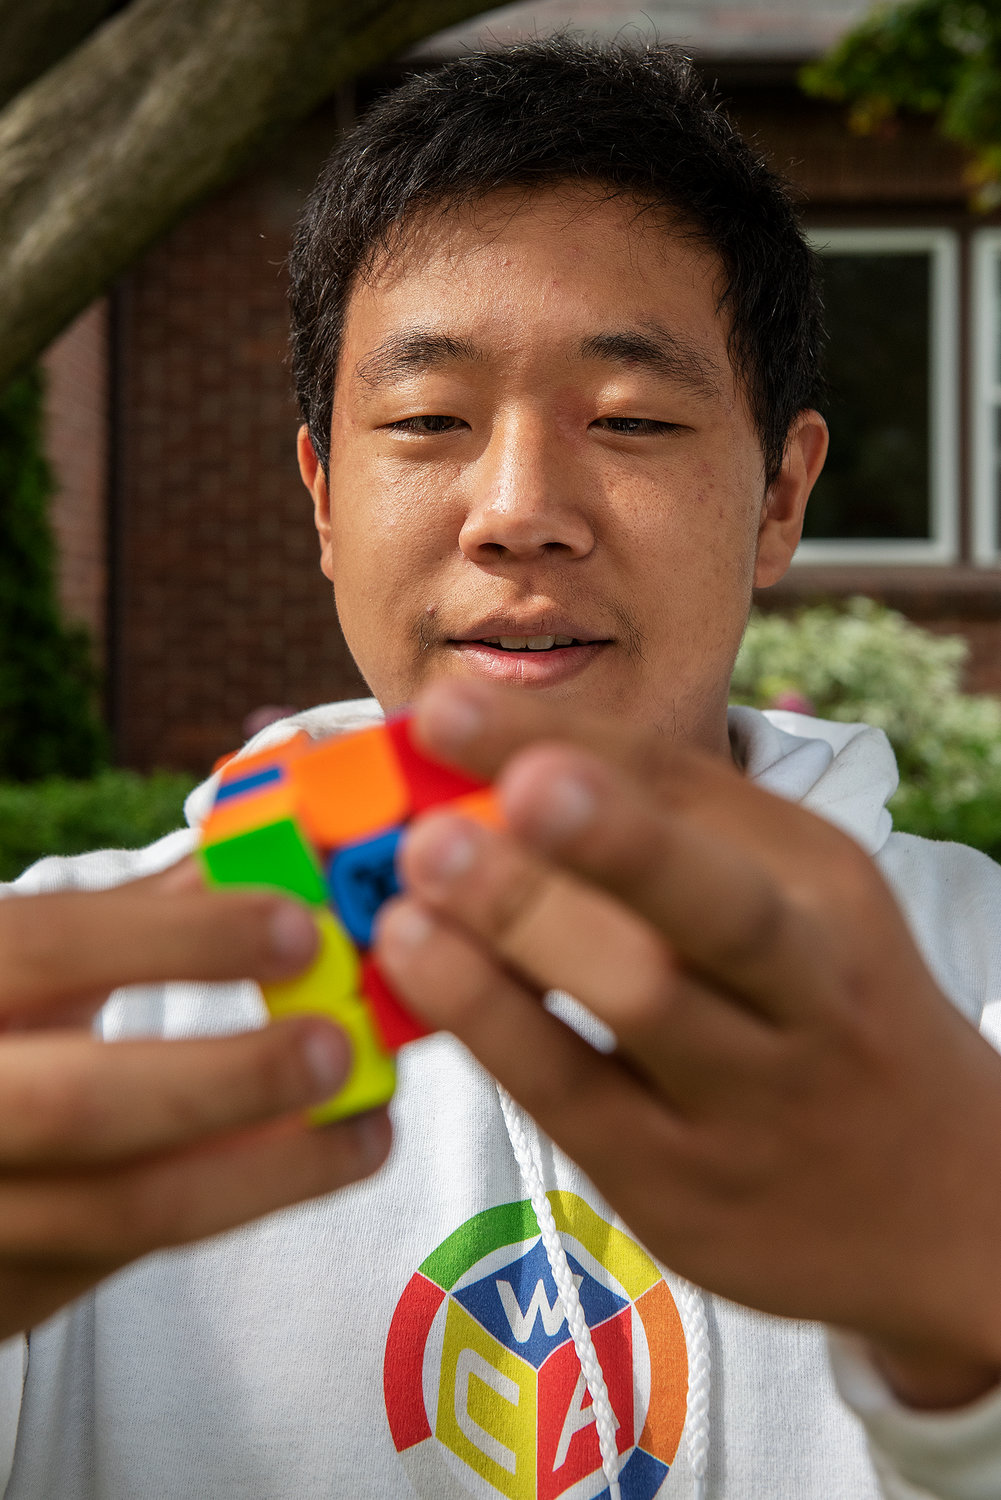 ERICA MILLER/THE DAILY GAZETTE   Benjamin Graber, 16, outside his home with his rubix cubes in Niskayuna on Wednesday, June 29, 2022. Graber is set to compete this weekend in the World Cube Association NYS Championship in Albany.